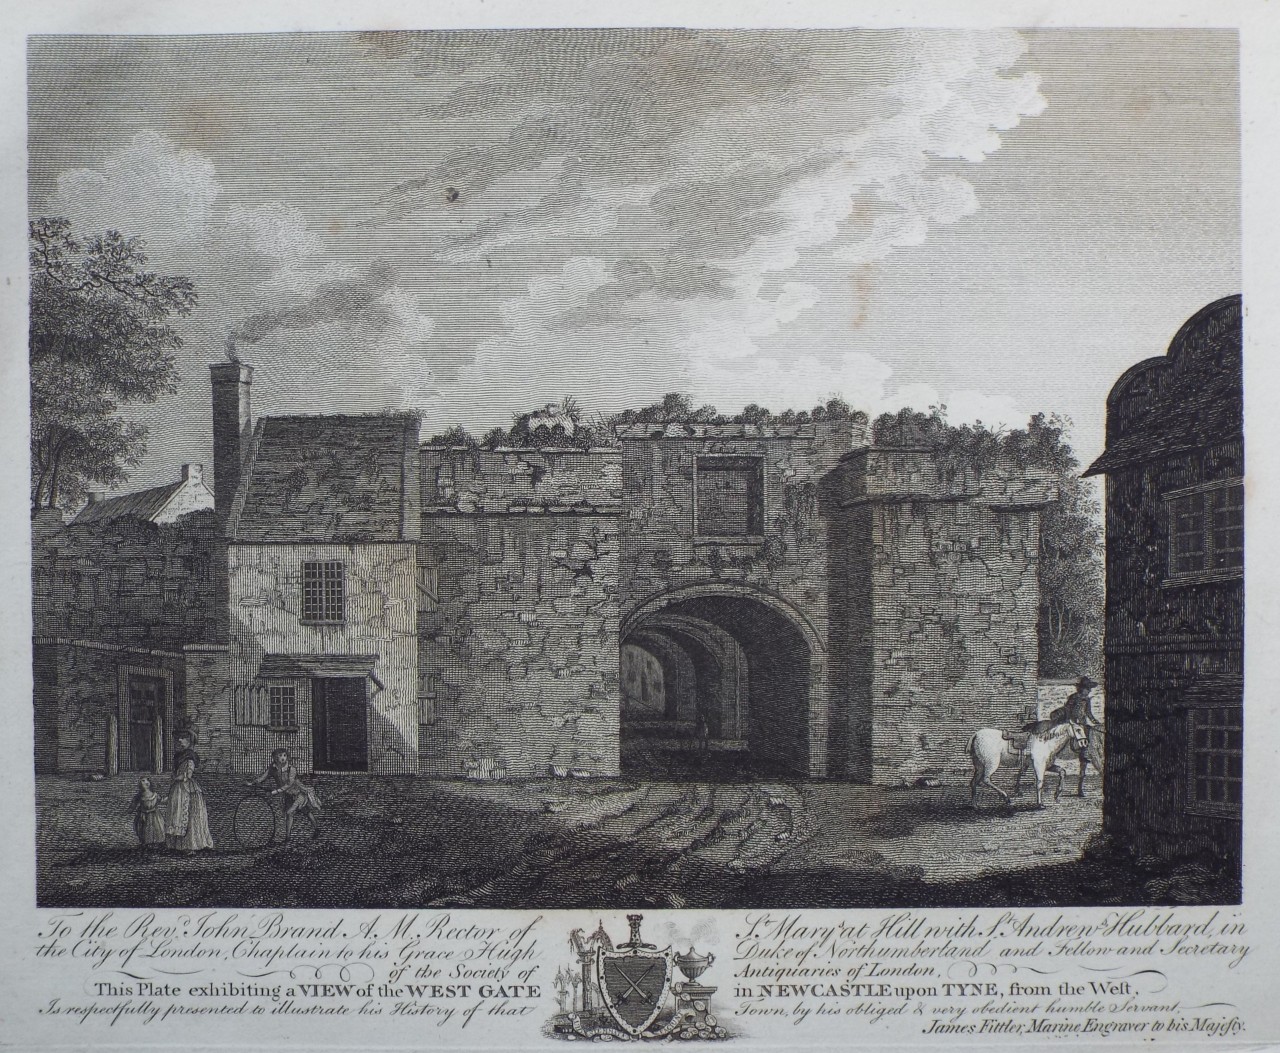 Print - View of the West Gate in Newcastle upon Tyne, from the West. - Fittler